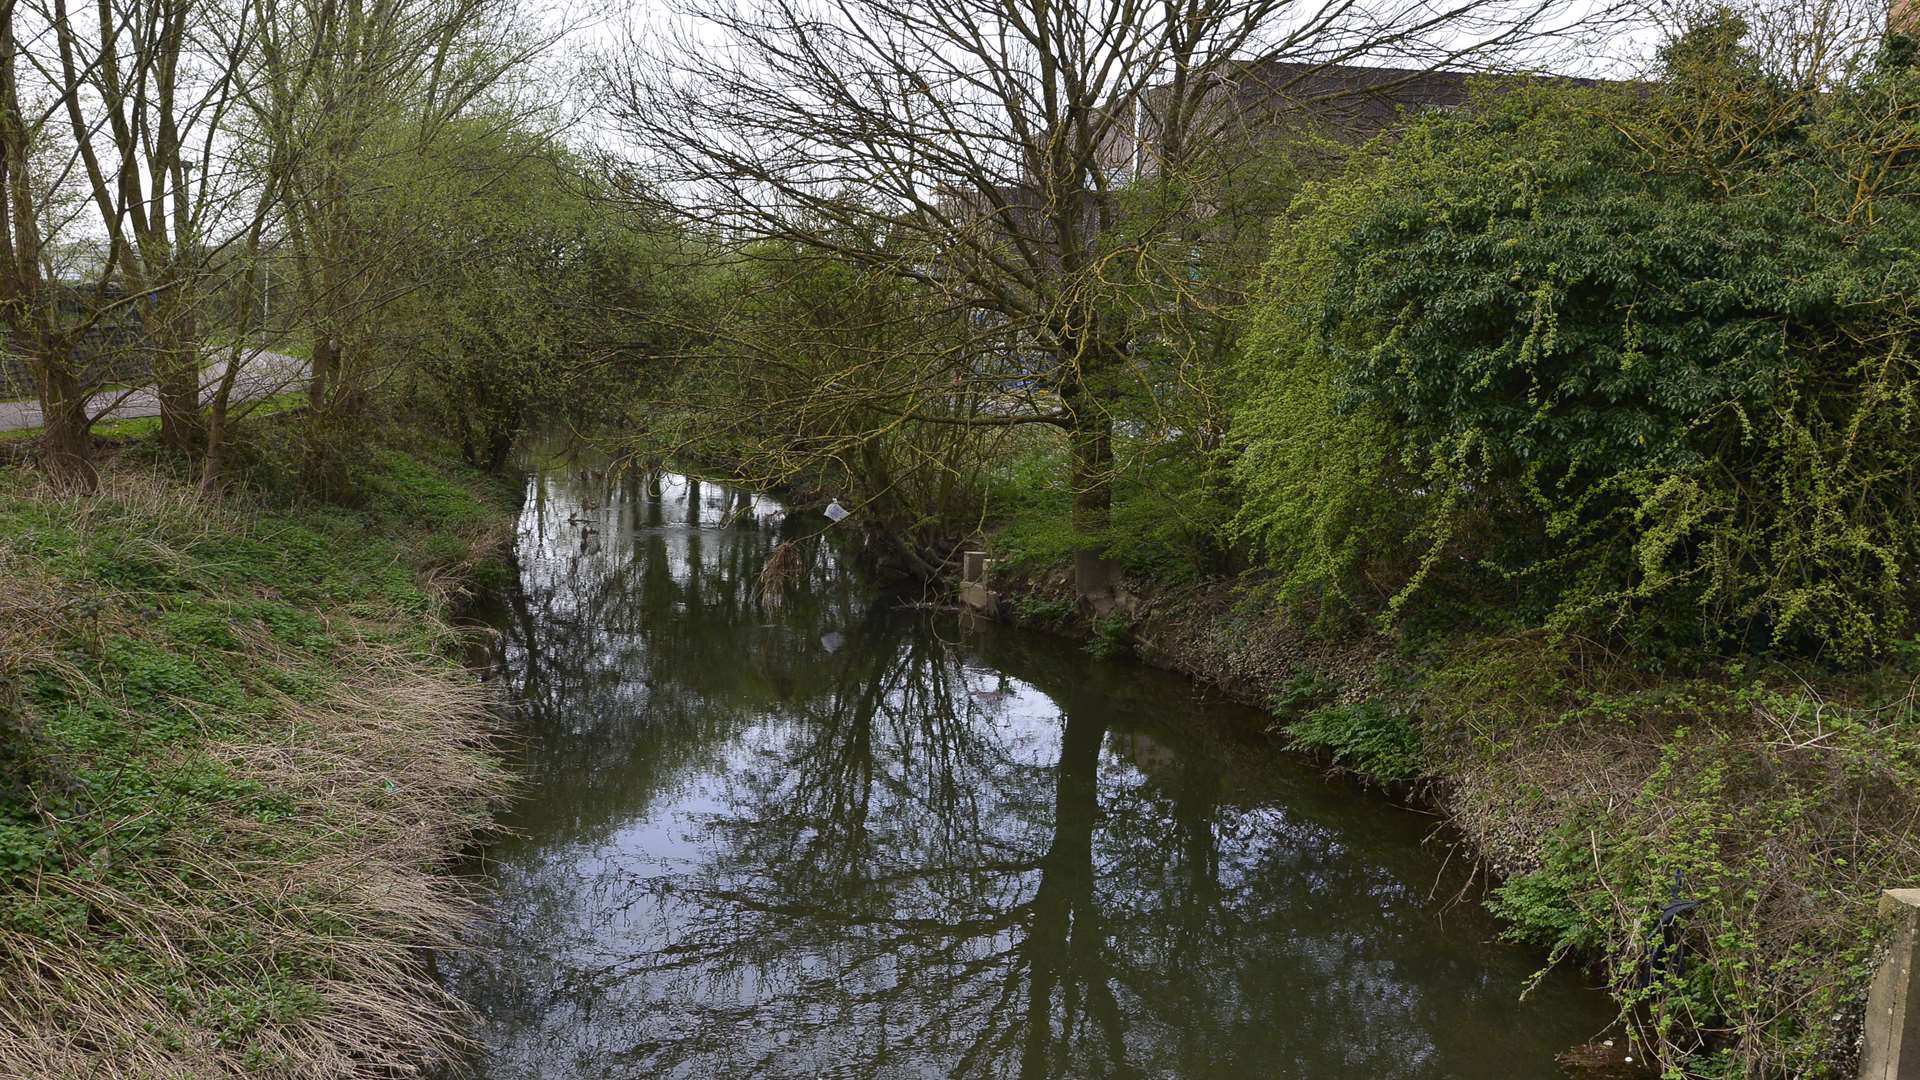 The alleged assault took place near to the River Stour.